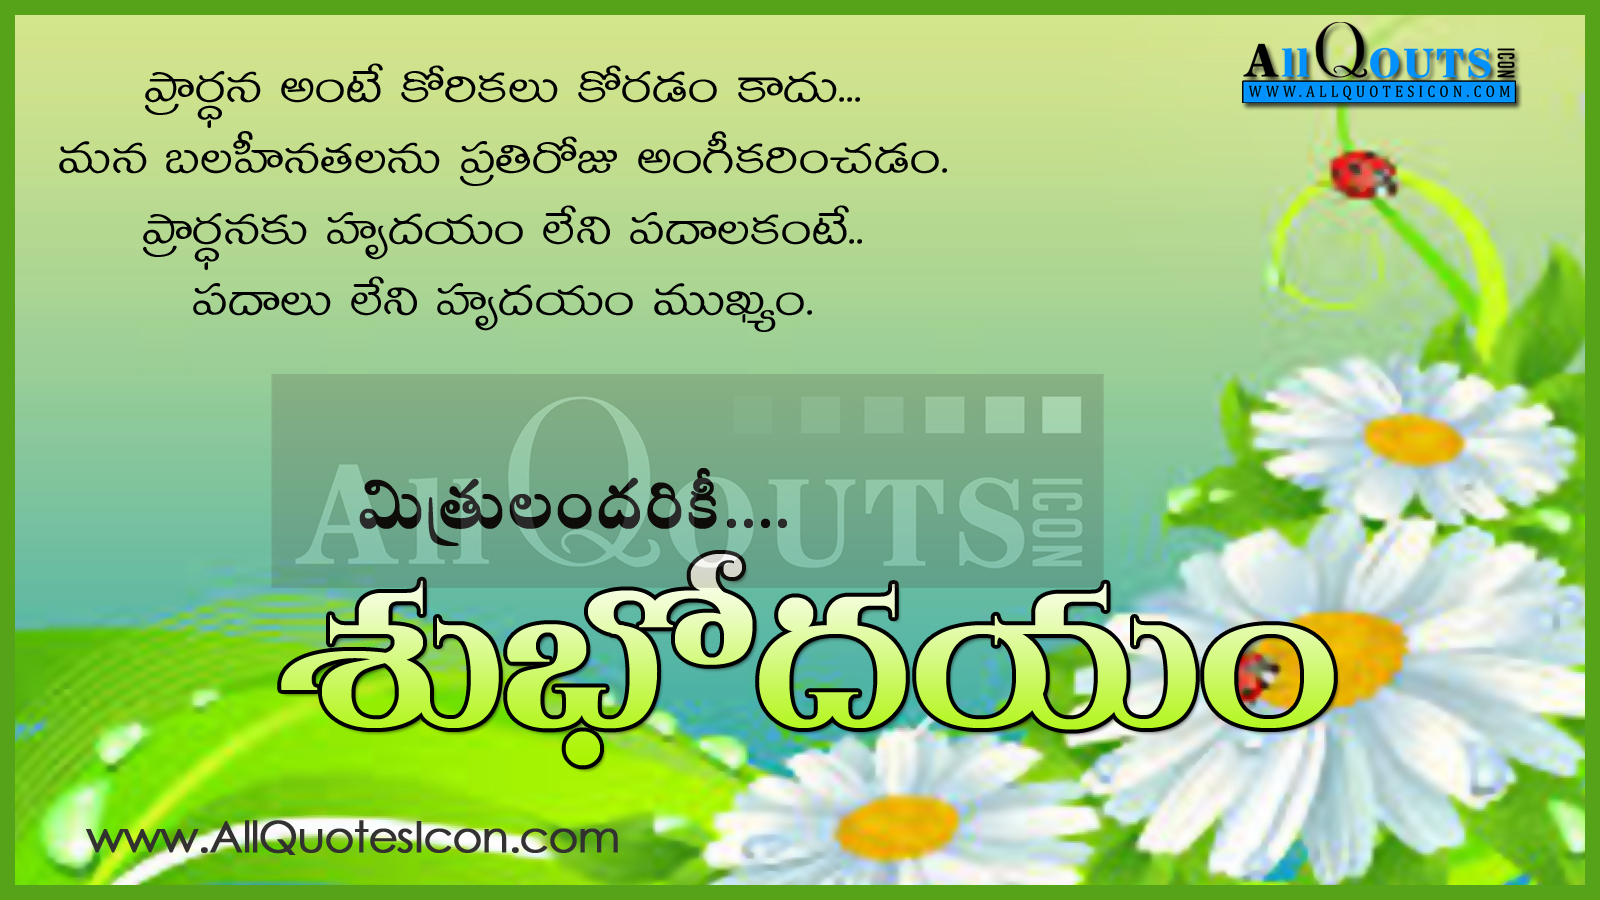 Telugu Good Morning Quotes Wshes Life Inspirational - Vector Collection - HD Wallpaper 